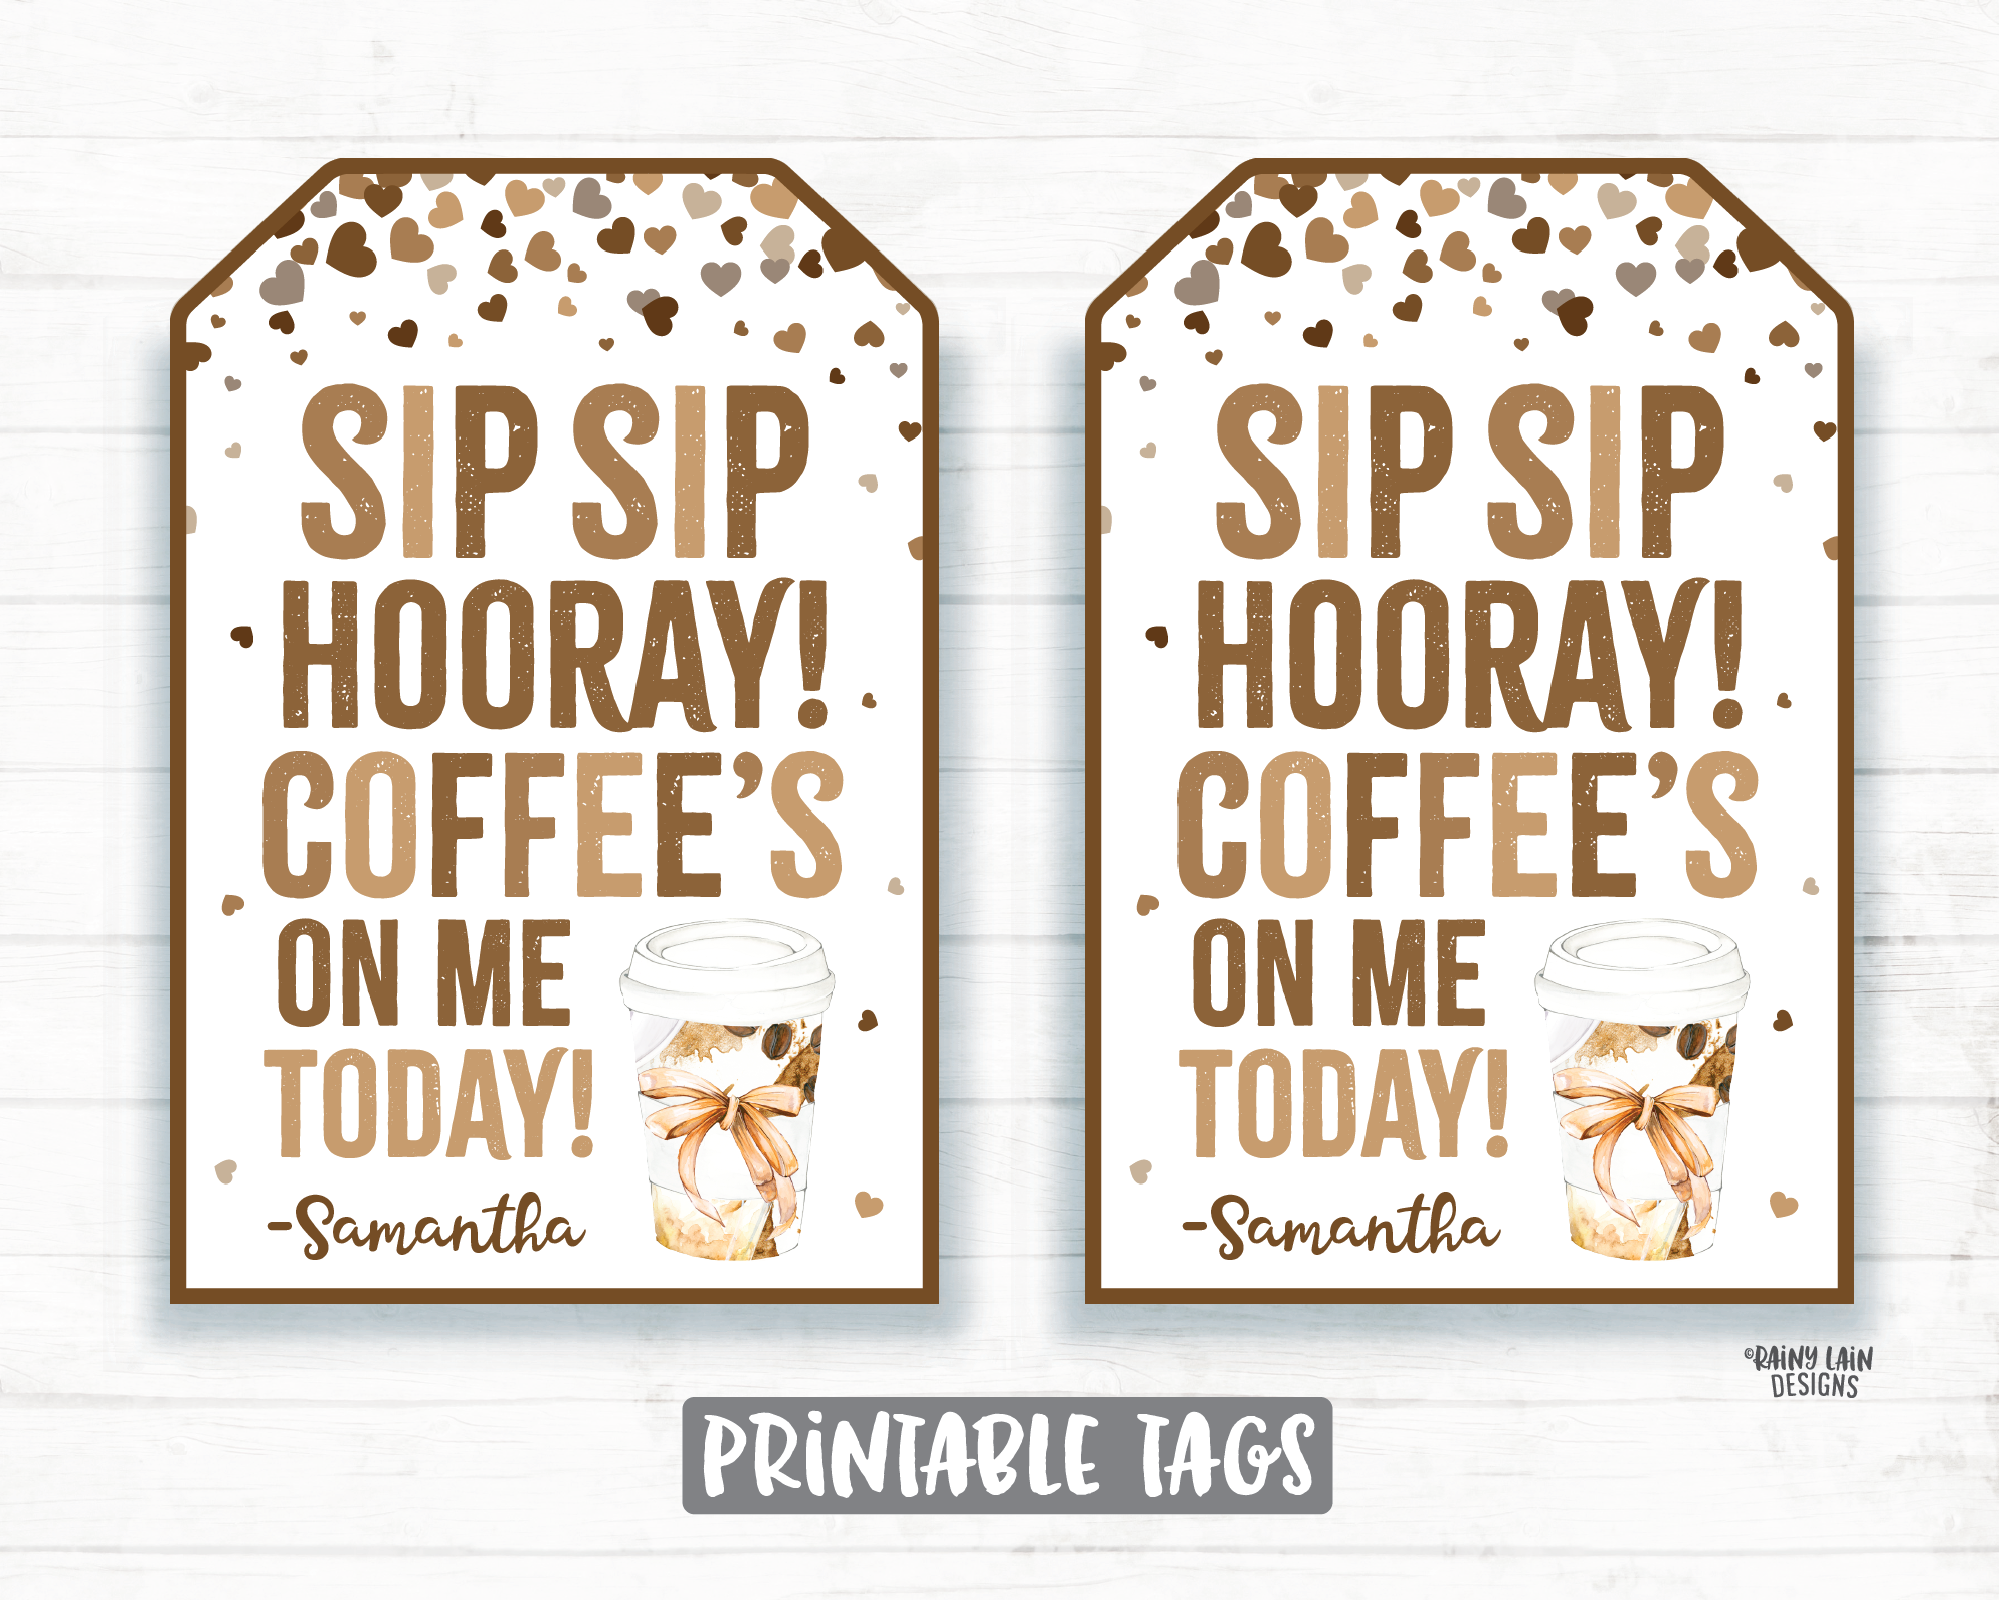 coffee-gift-tag-sip-sip-hooray-coffee-s-on-me-today-tag-employee-app